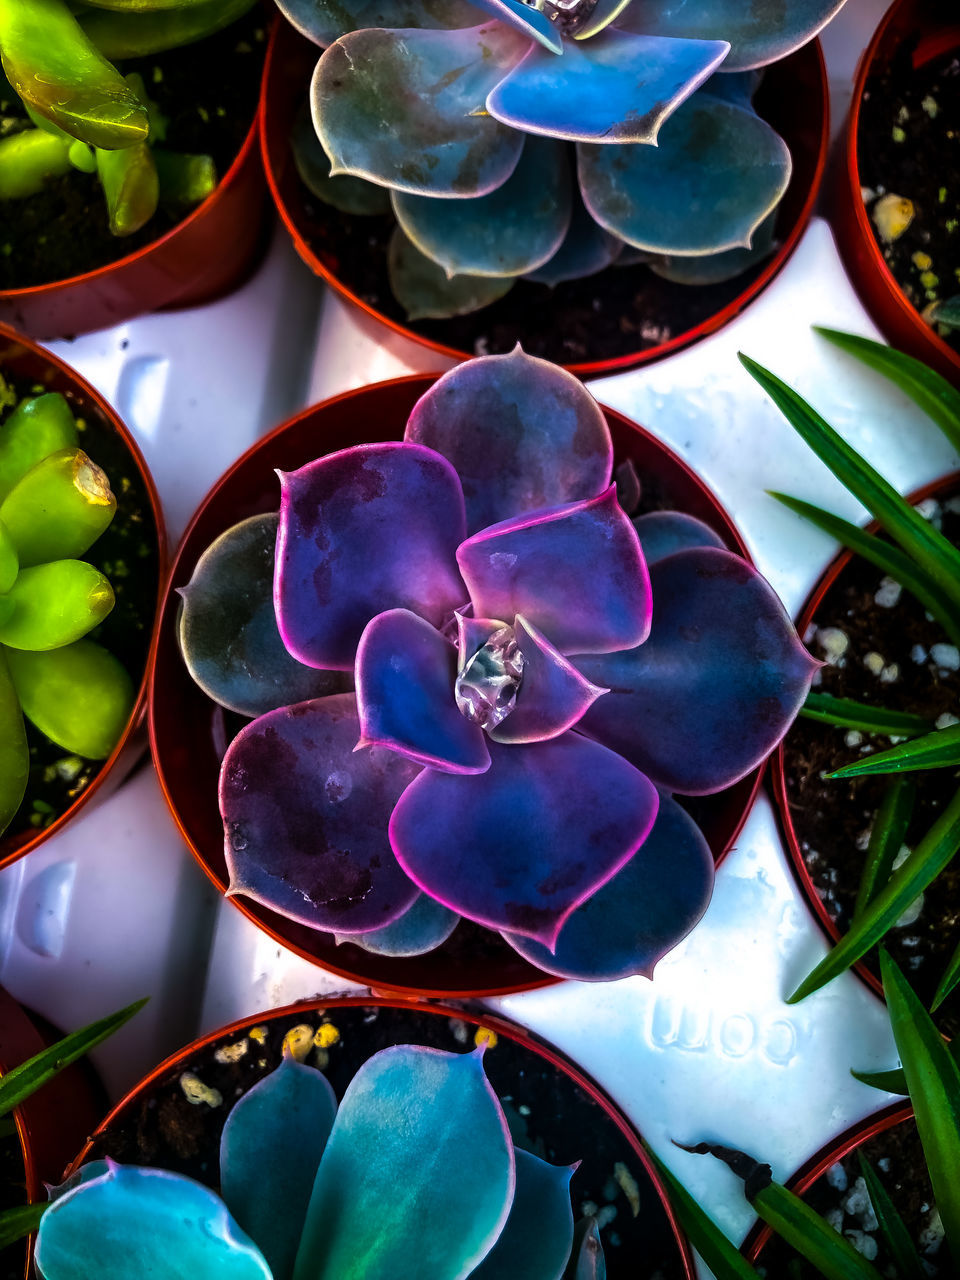 flower, plant, high angle view, no people, green, nature, beauty in nature, close-up, leaf, growth, multi colored, flowering plant, petal, day, freshness, purple, outdoors, blue, plant part, succulent plant